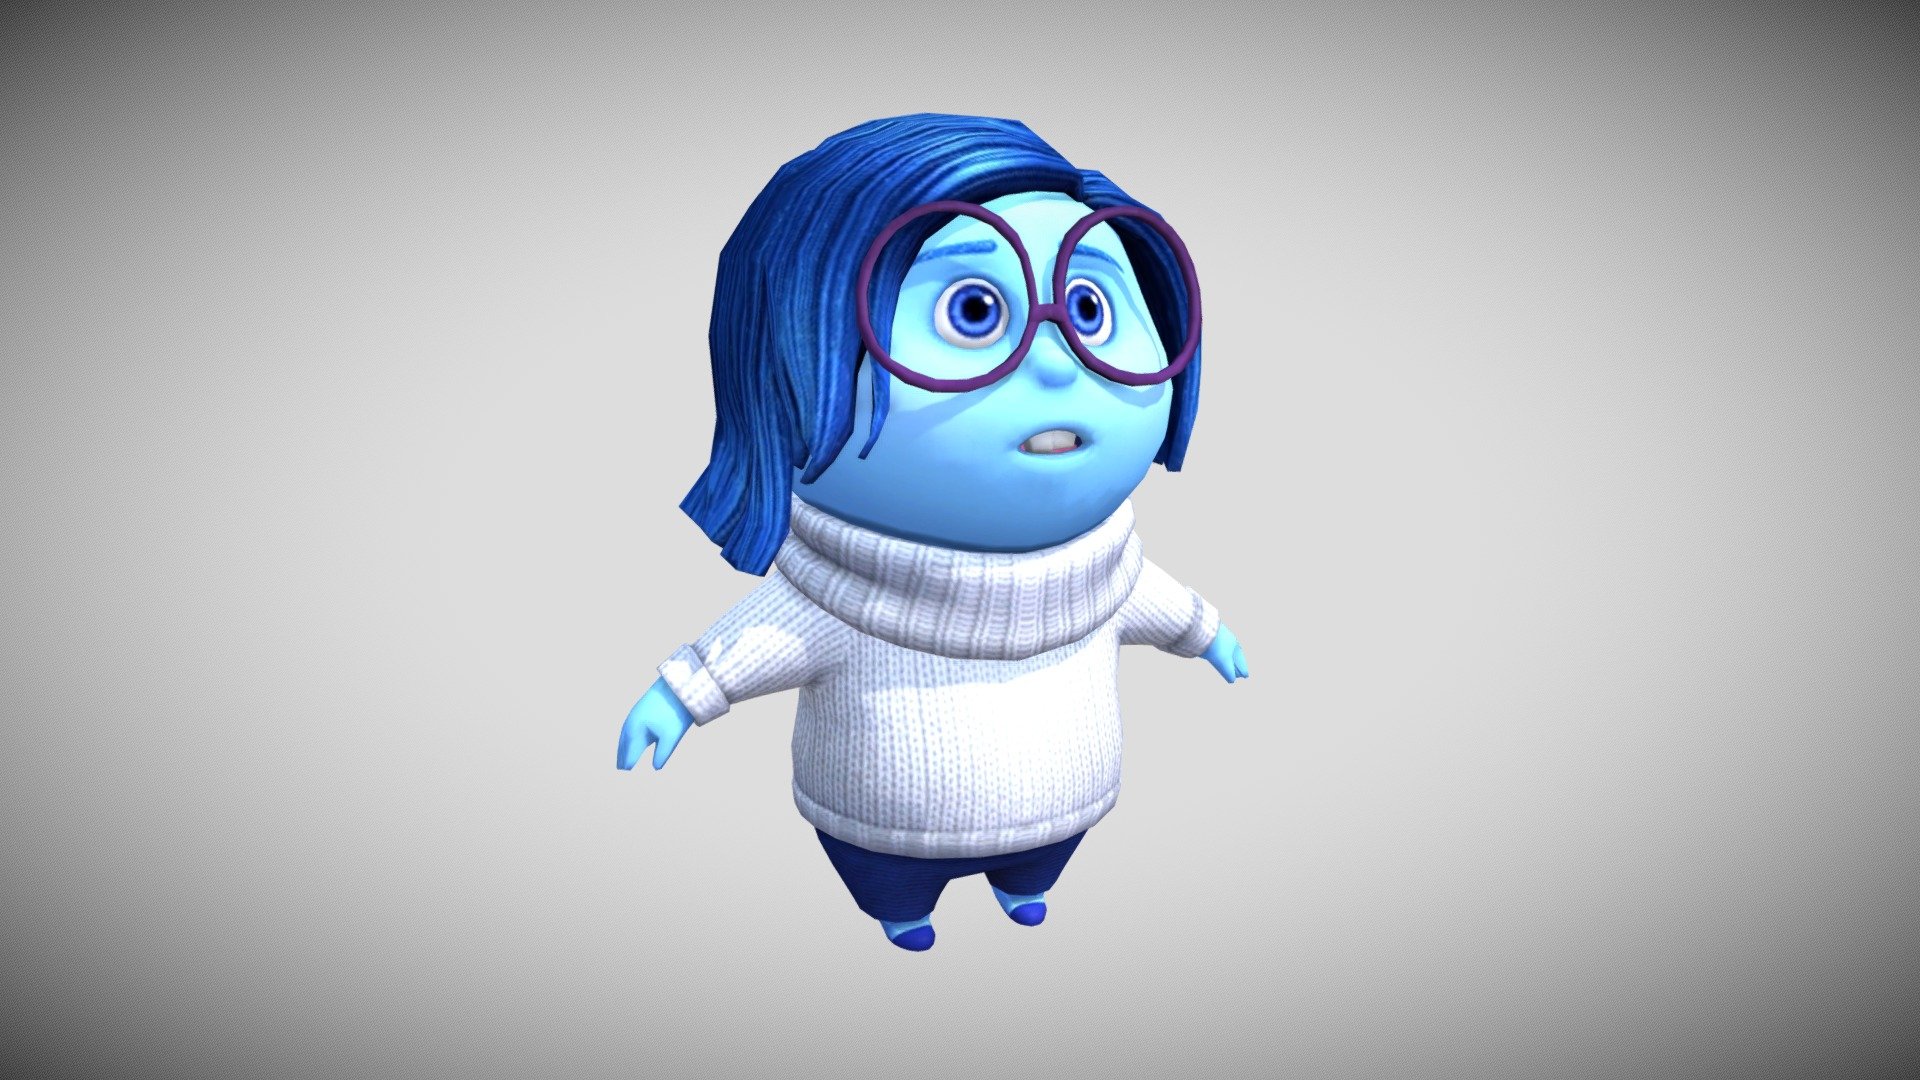 This is the official model of Sadness from Disney Magic Kingdoms, ripped by me.

Files inside

It includes the High and Low poly models with the rigging from the game itself. it also includes a drawing of Sadness refered as “sadness_store”, now as a .TGA file for it.

Credits

The model and character is owned and made by Disney, Pixar and Gameloft 3d model